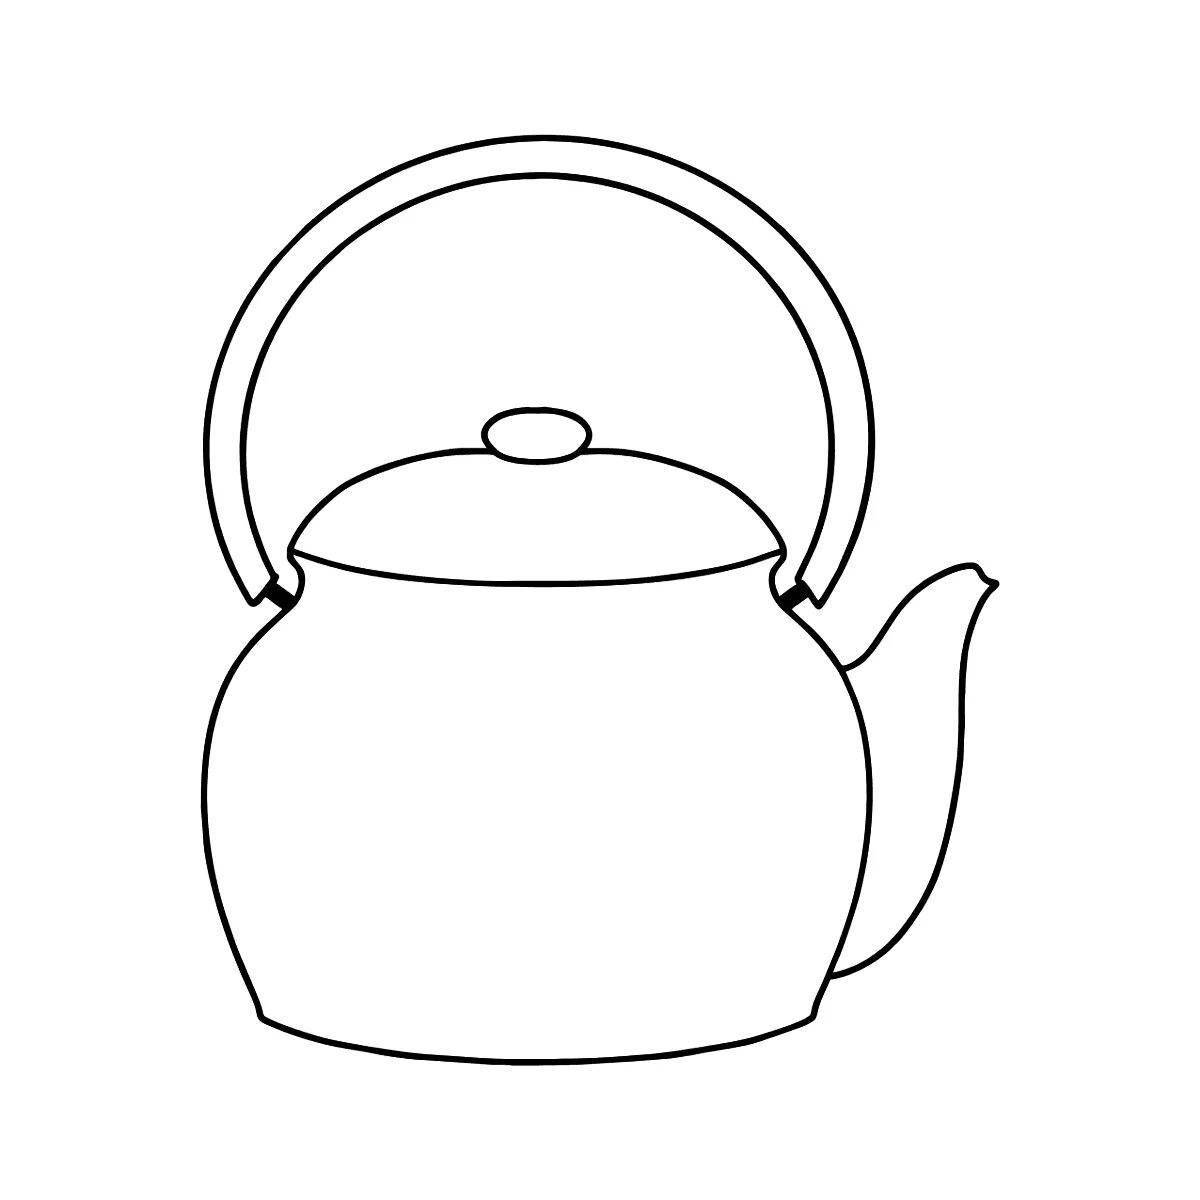 Coloring book cute electric kettle for kids